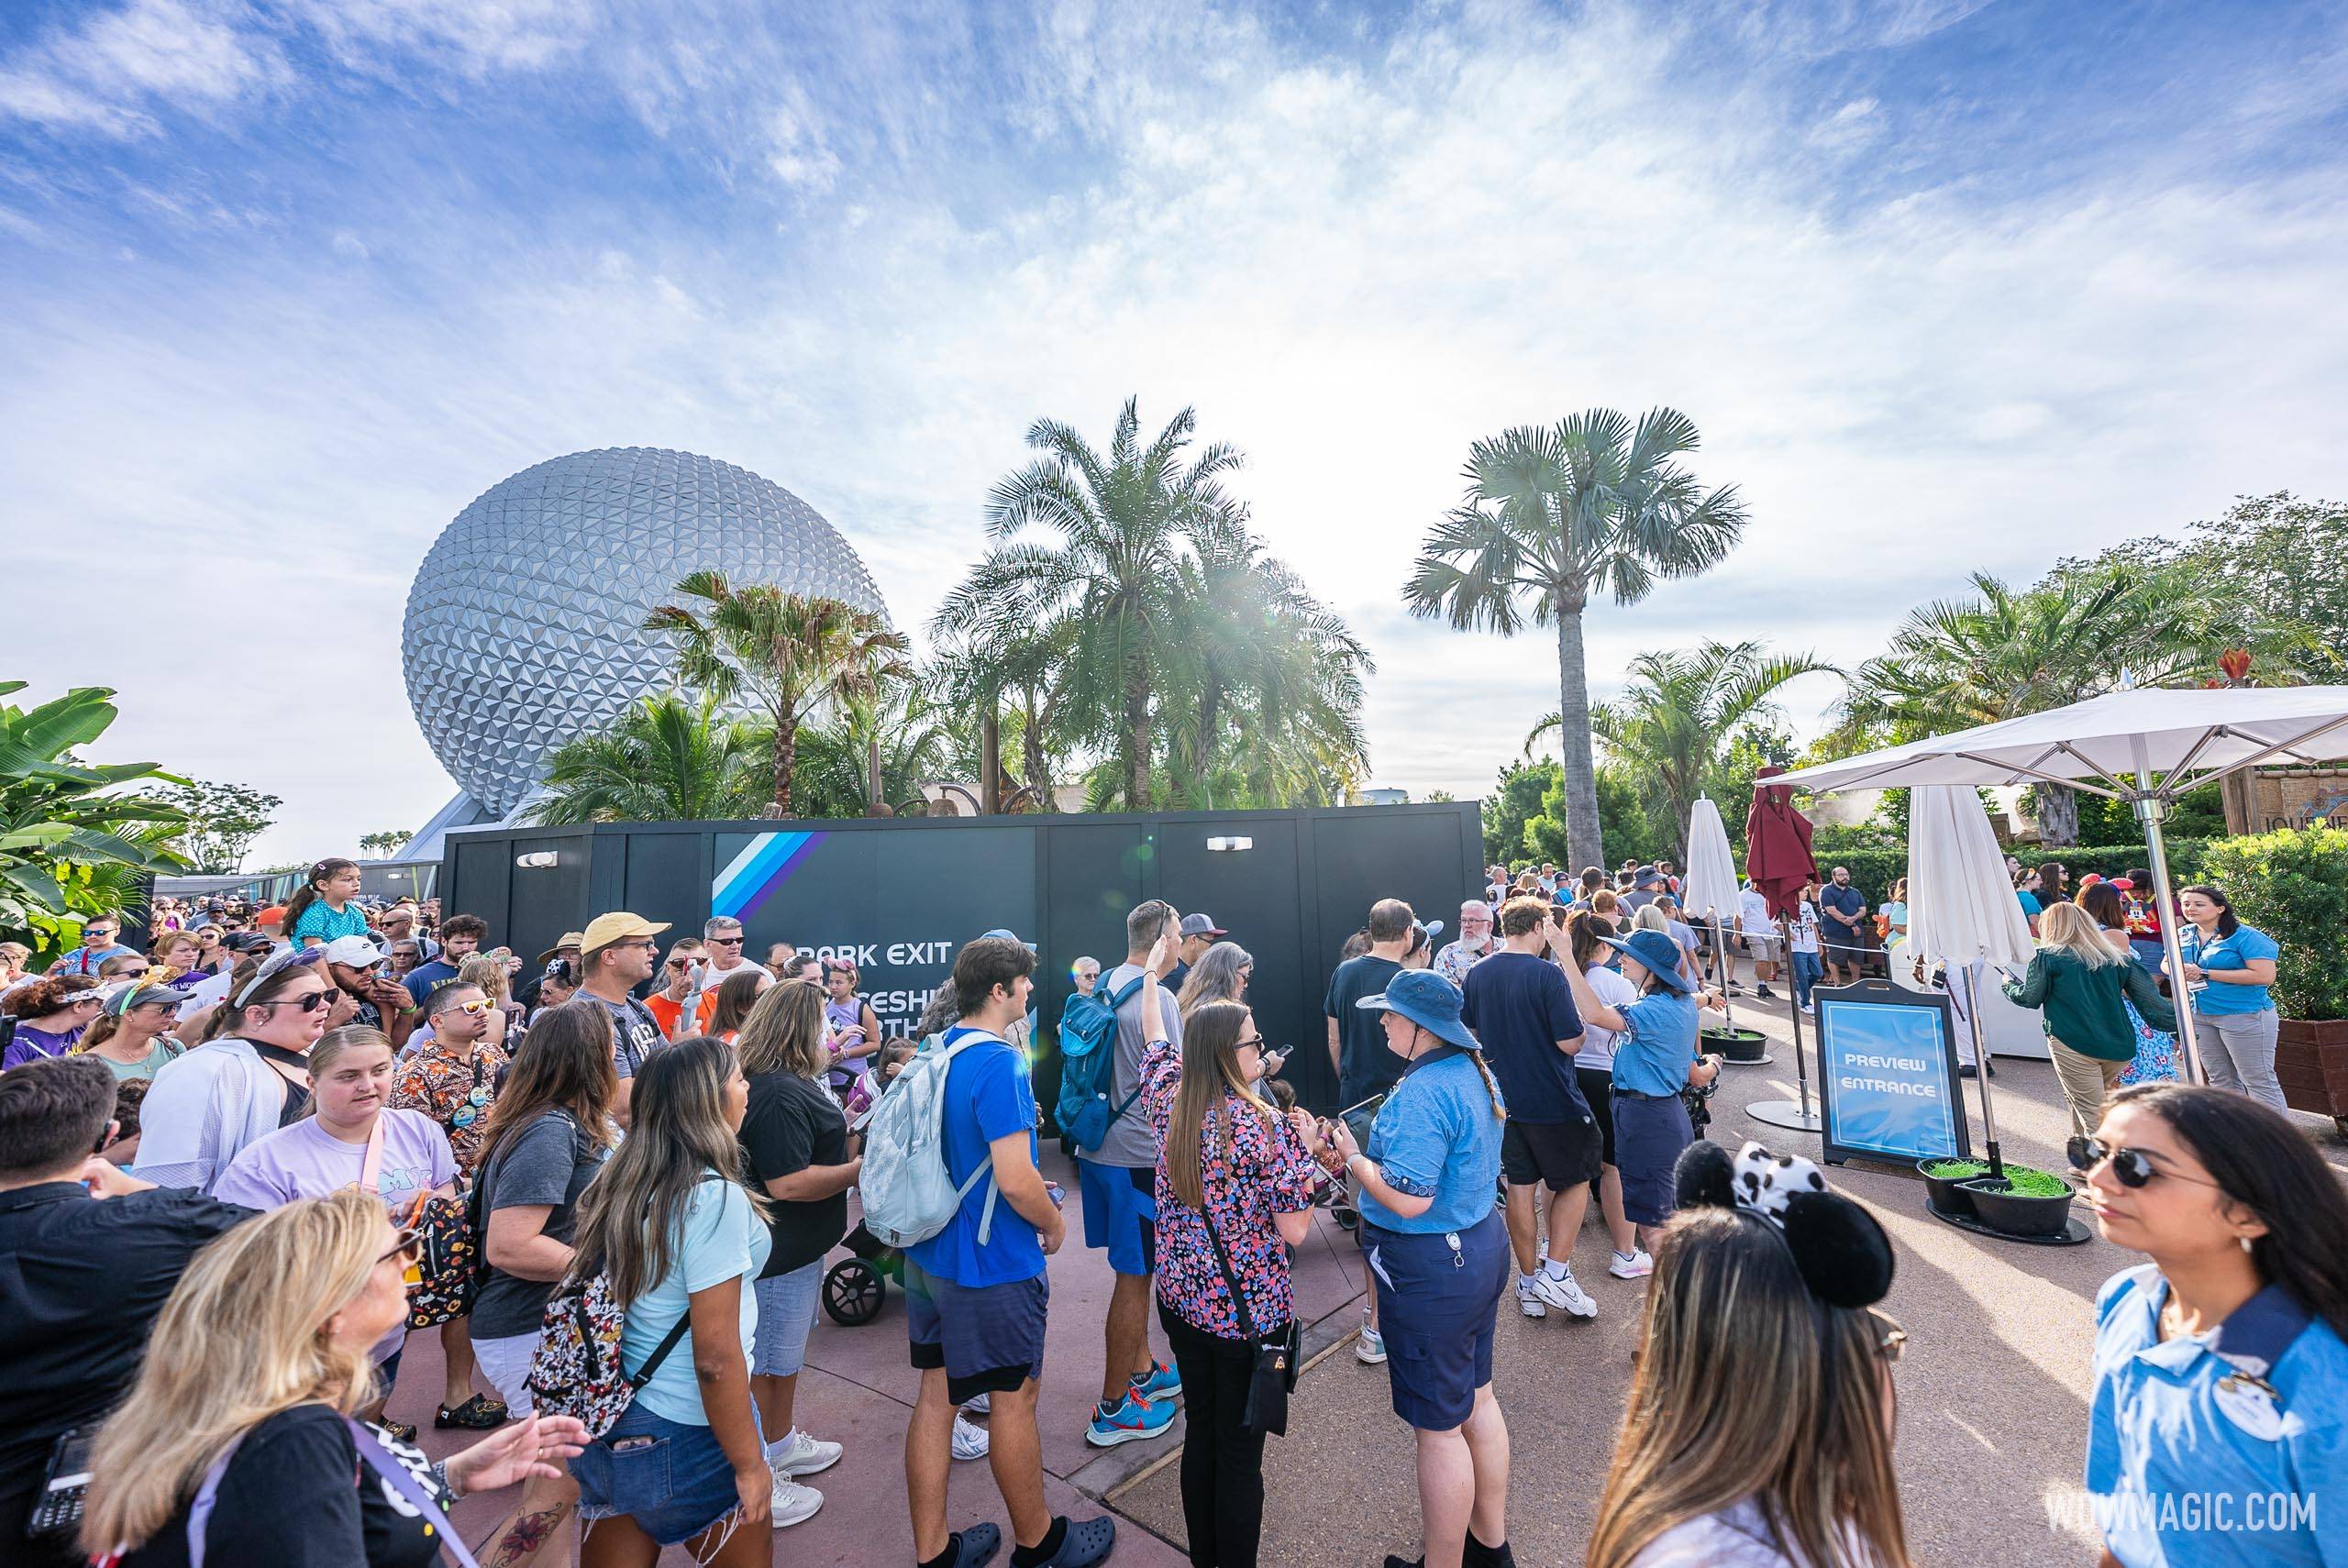 Disney modifies queue plans for EPCOT's Journey of Water previews after initial hiccups